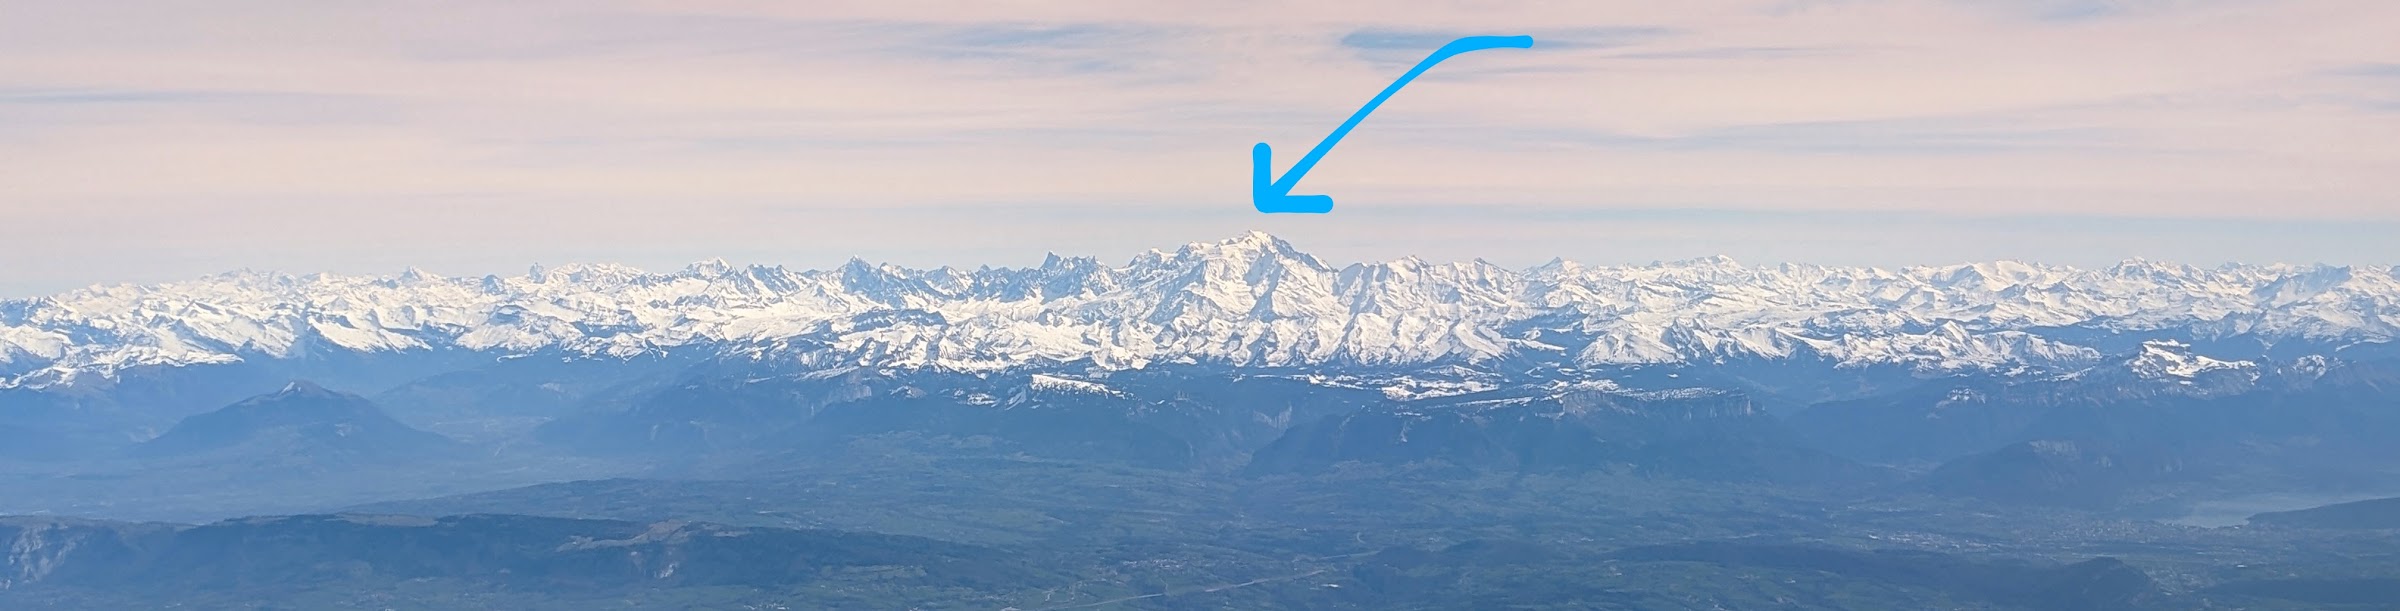 Mont-Blanc from a plane.